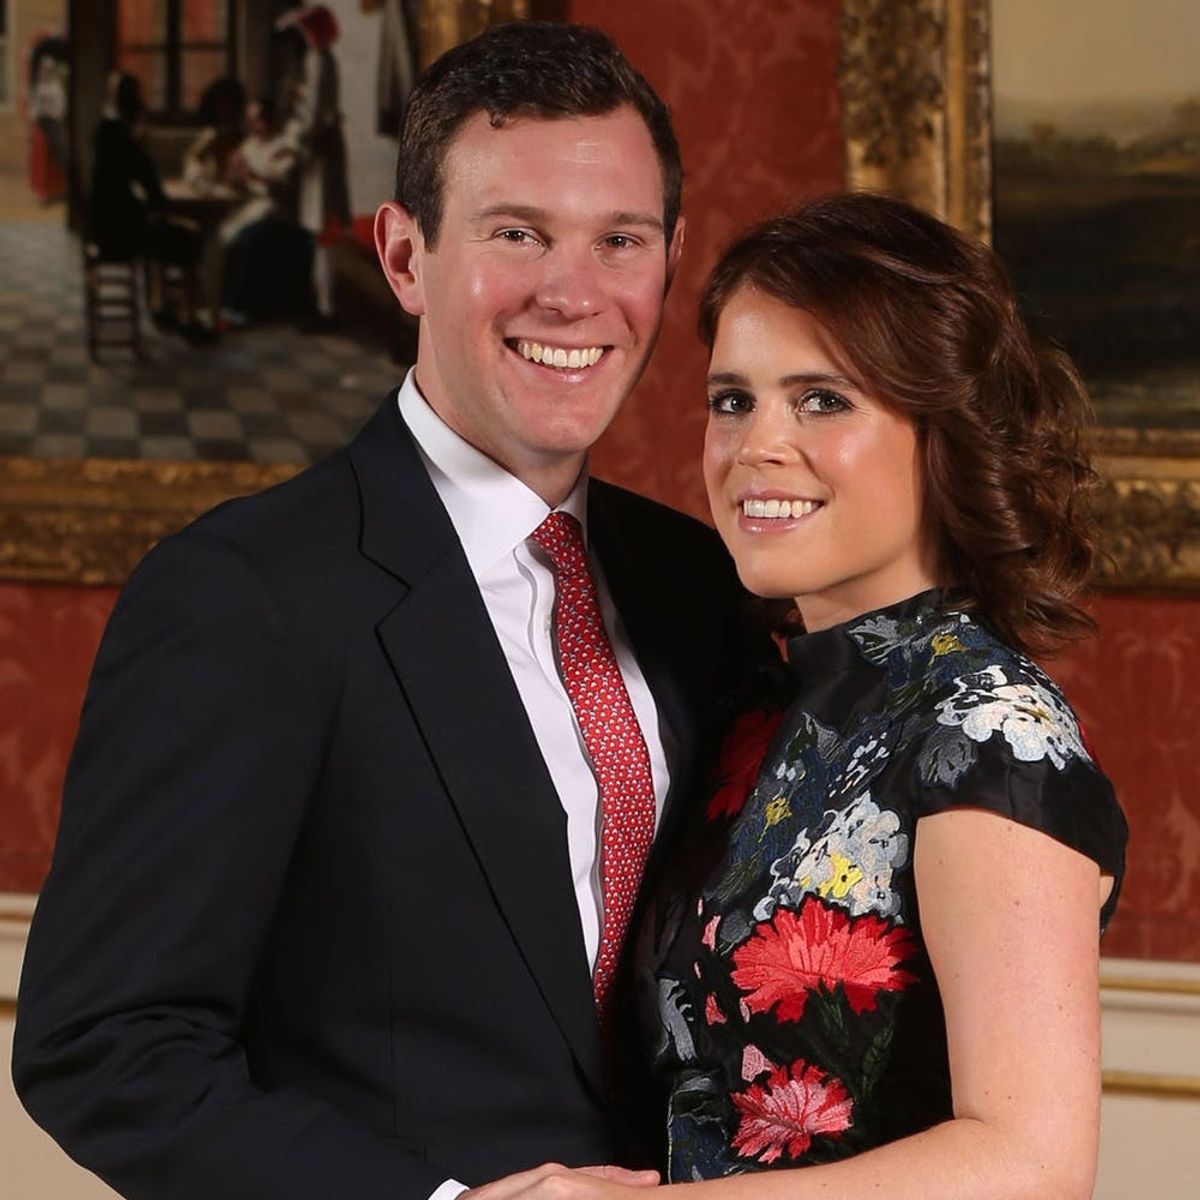 Here’s How to Watch Princess Eugenie’s Royal Wedding on TV